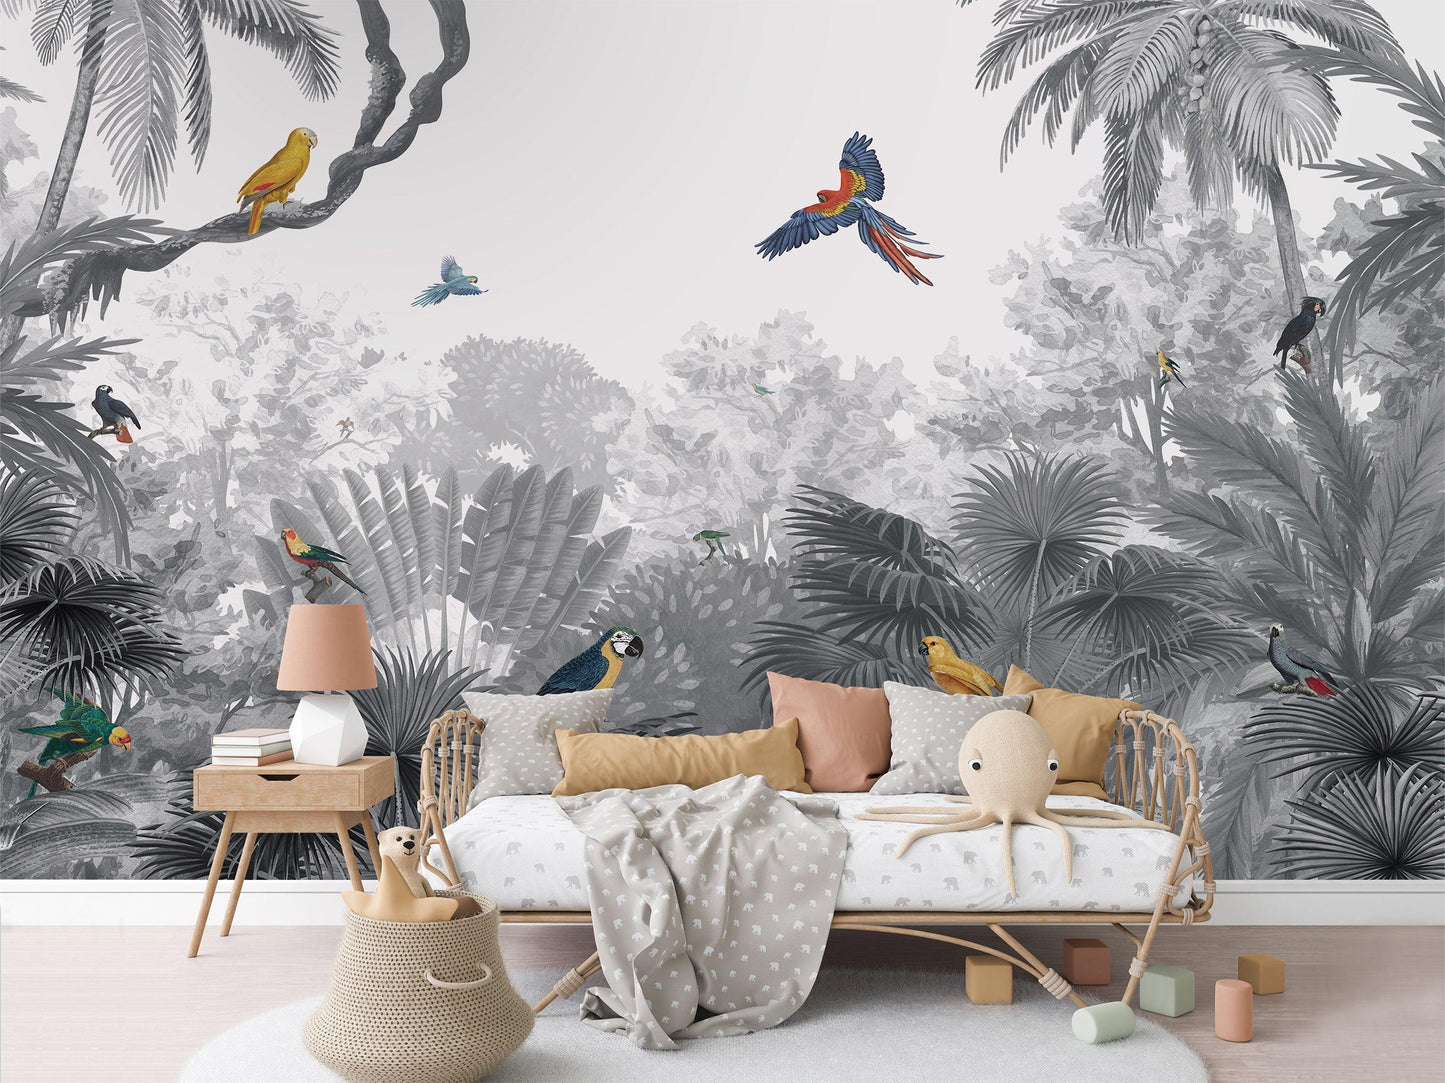 Canopy Jungle Black and White Wallpaper Mural - MAIA HOMES